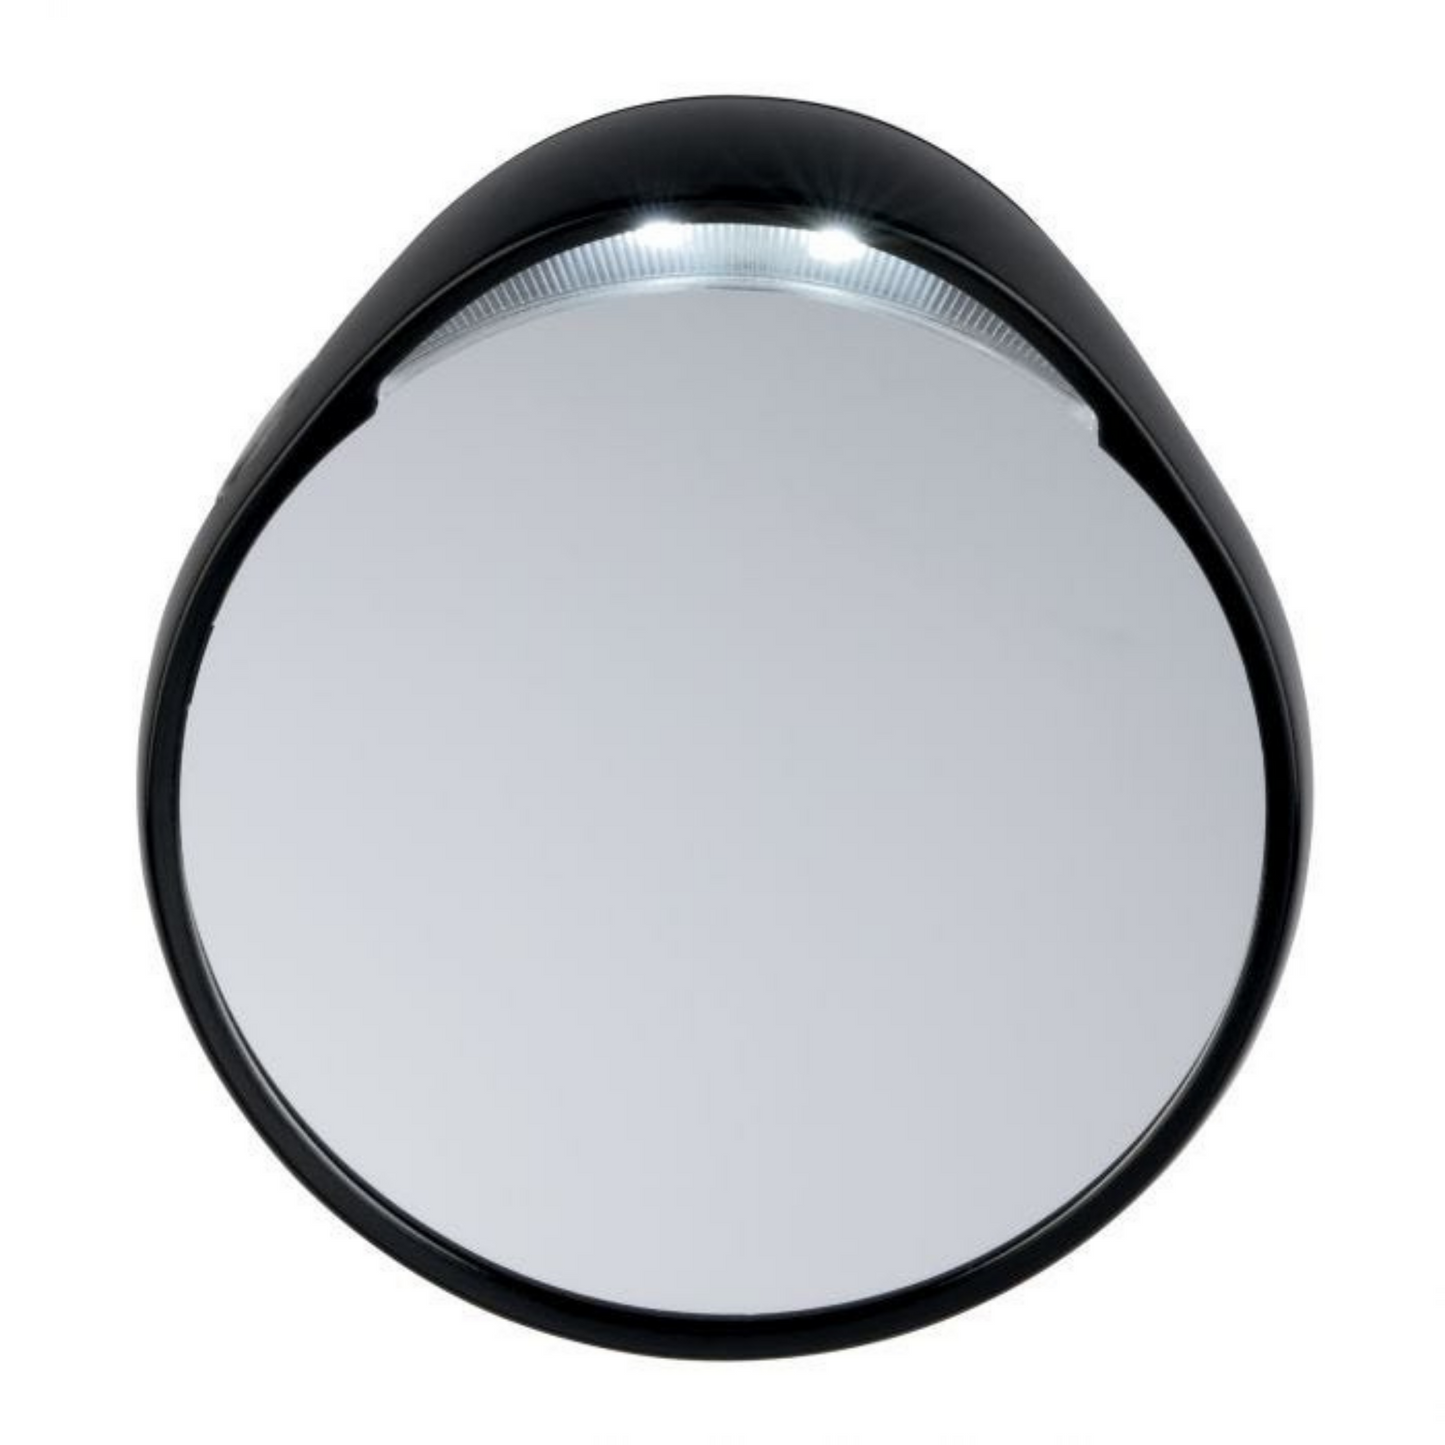 Primary image of 10x Lighted Magnification Mirror